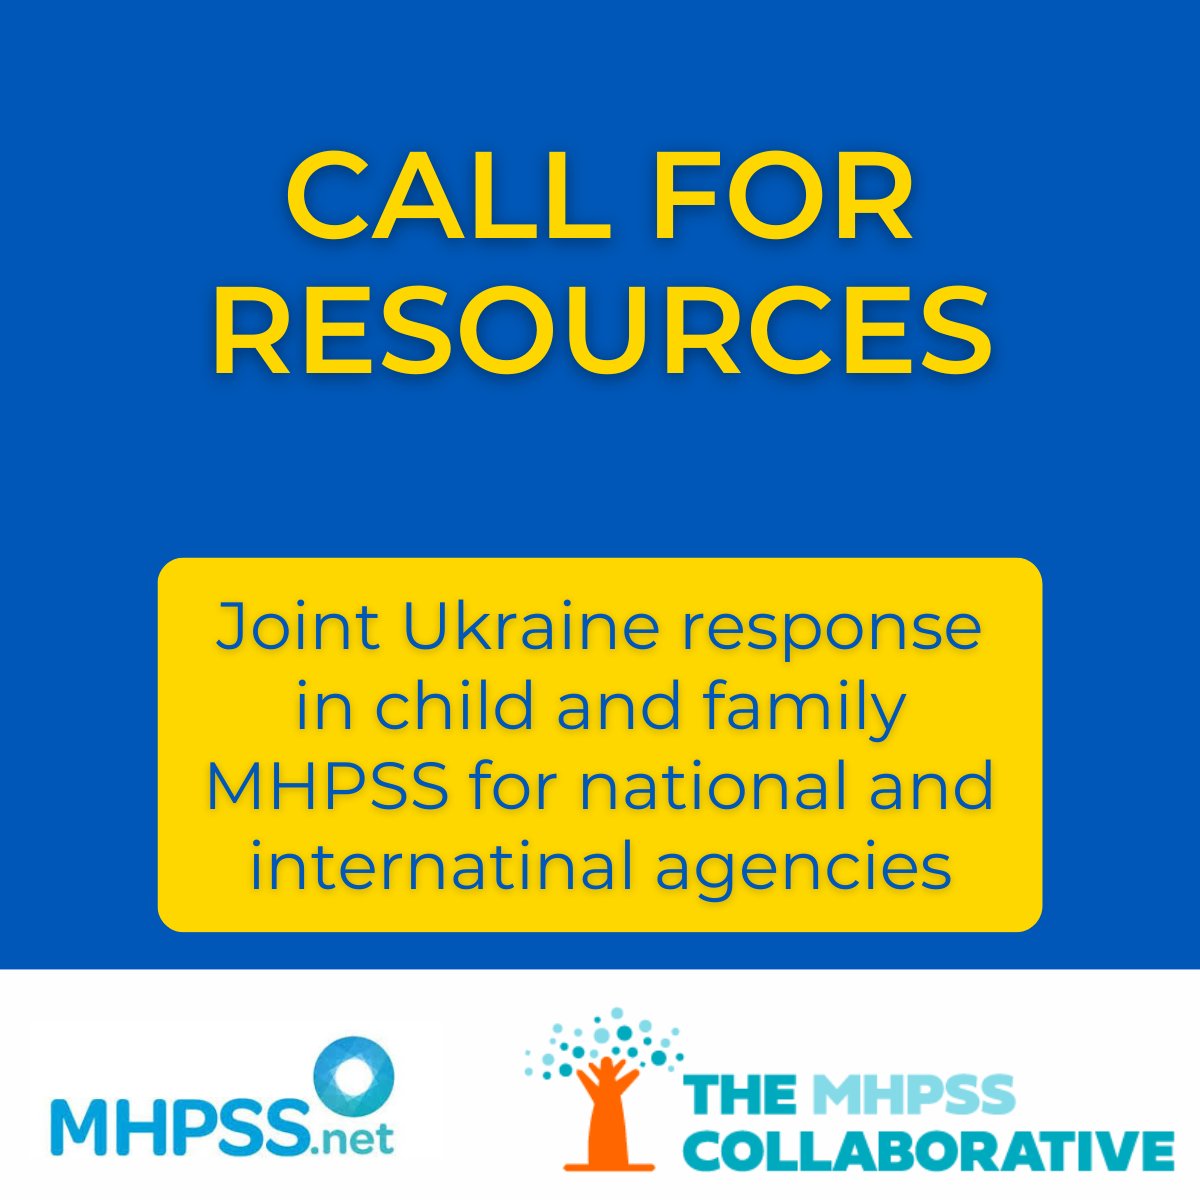 Our project partner @MHPSSCollabora1 together with @mhpss are collecting useful resources for a joint #Ukraine response in child and family #MHPSS for national and international agencies. 
@FOCUS_Refugees @kids4alll @NEWABC_EU @SGN_Support @kmop_ngo 